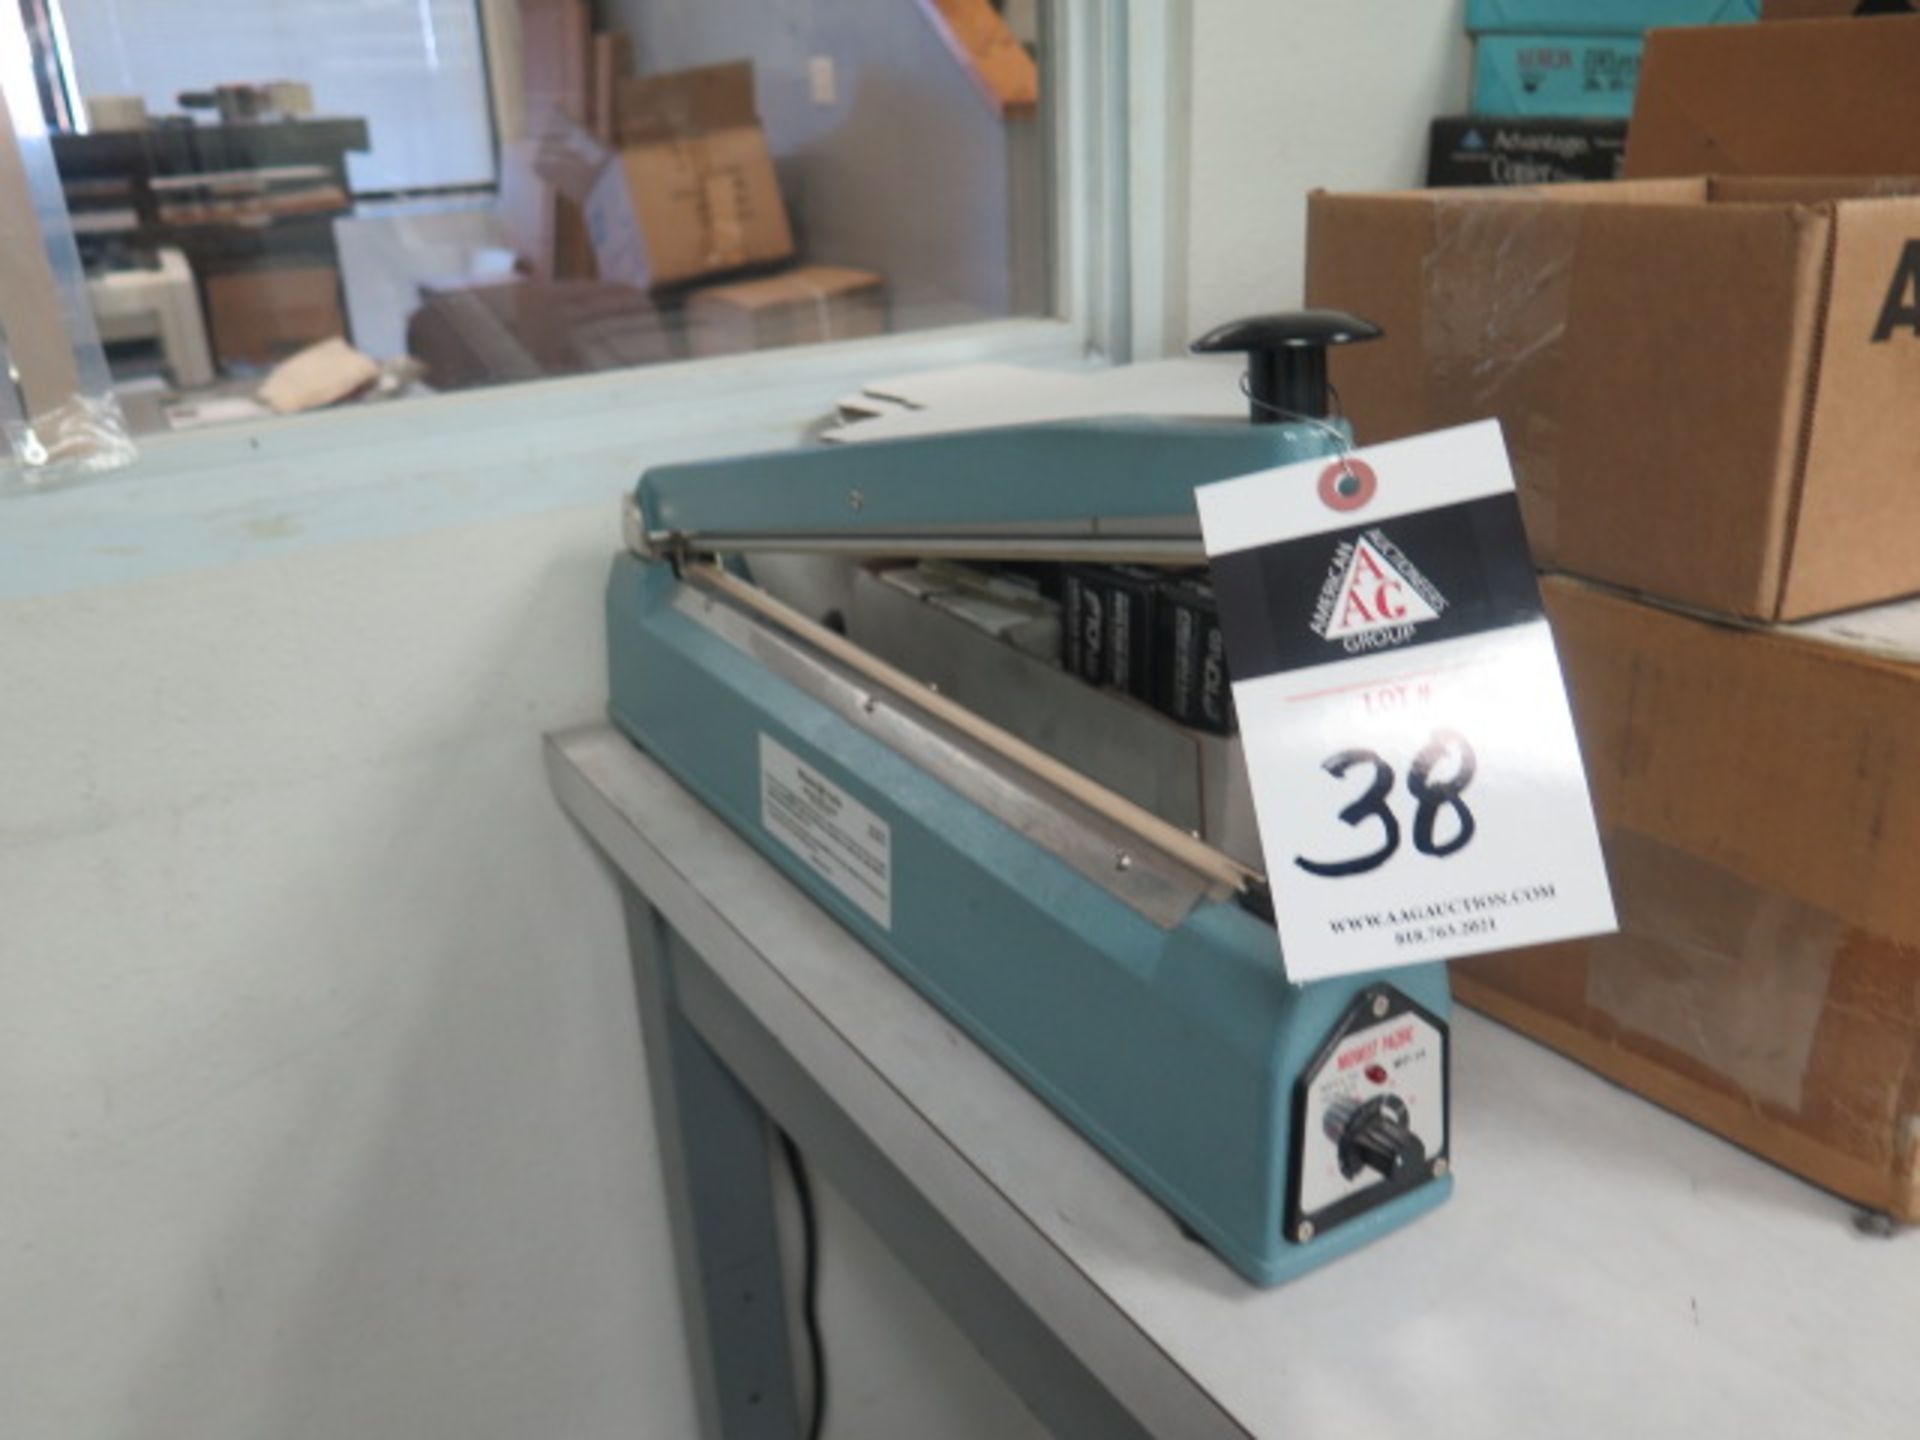 Shipping Supplies, Impulse Bar Sealer, Box Stapler and Misc (SOLD AS-IS - NO WARRANTY)